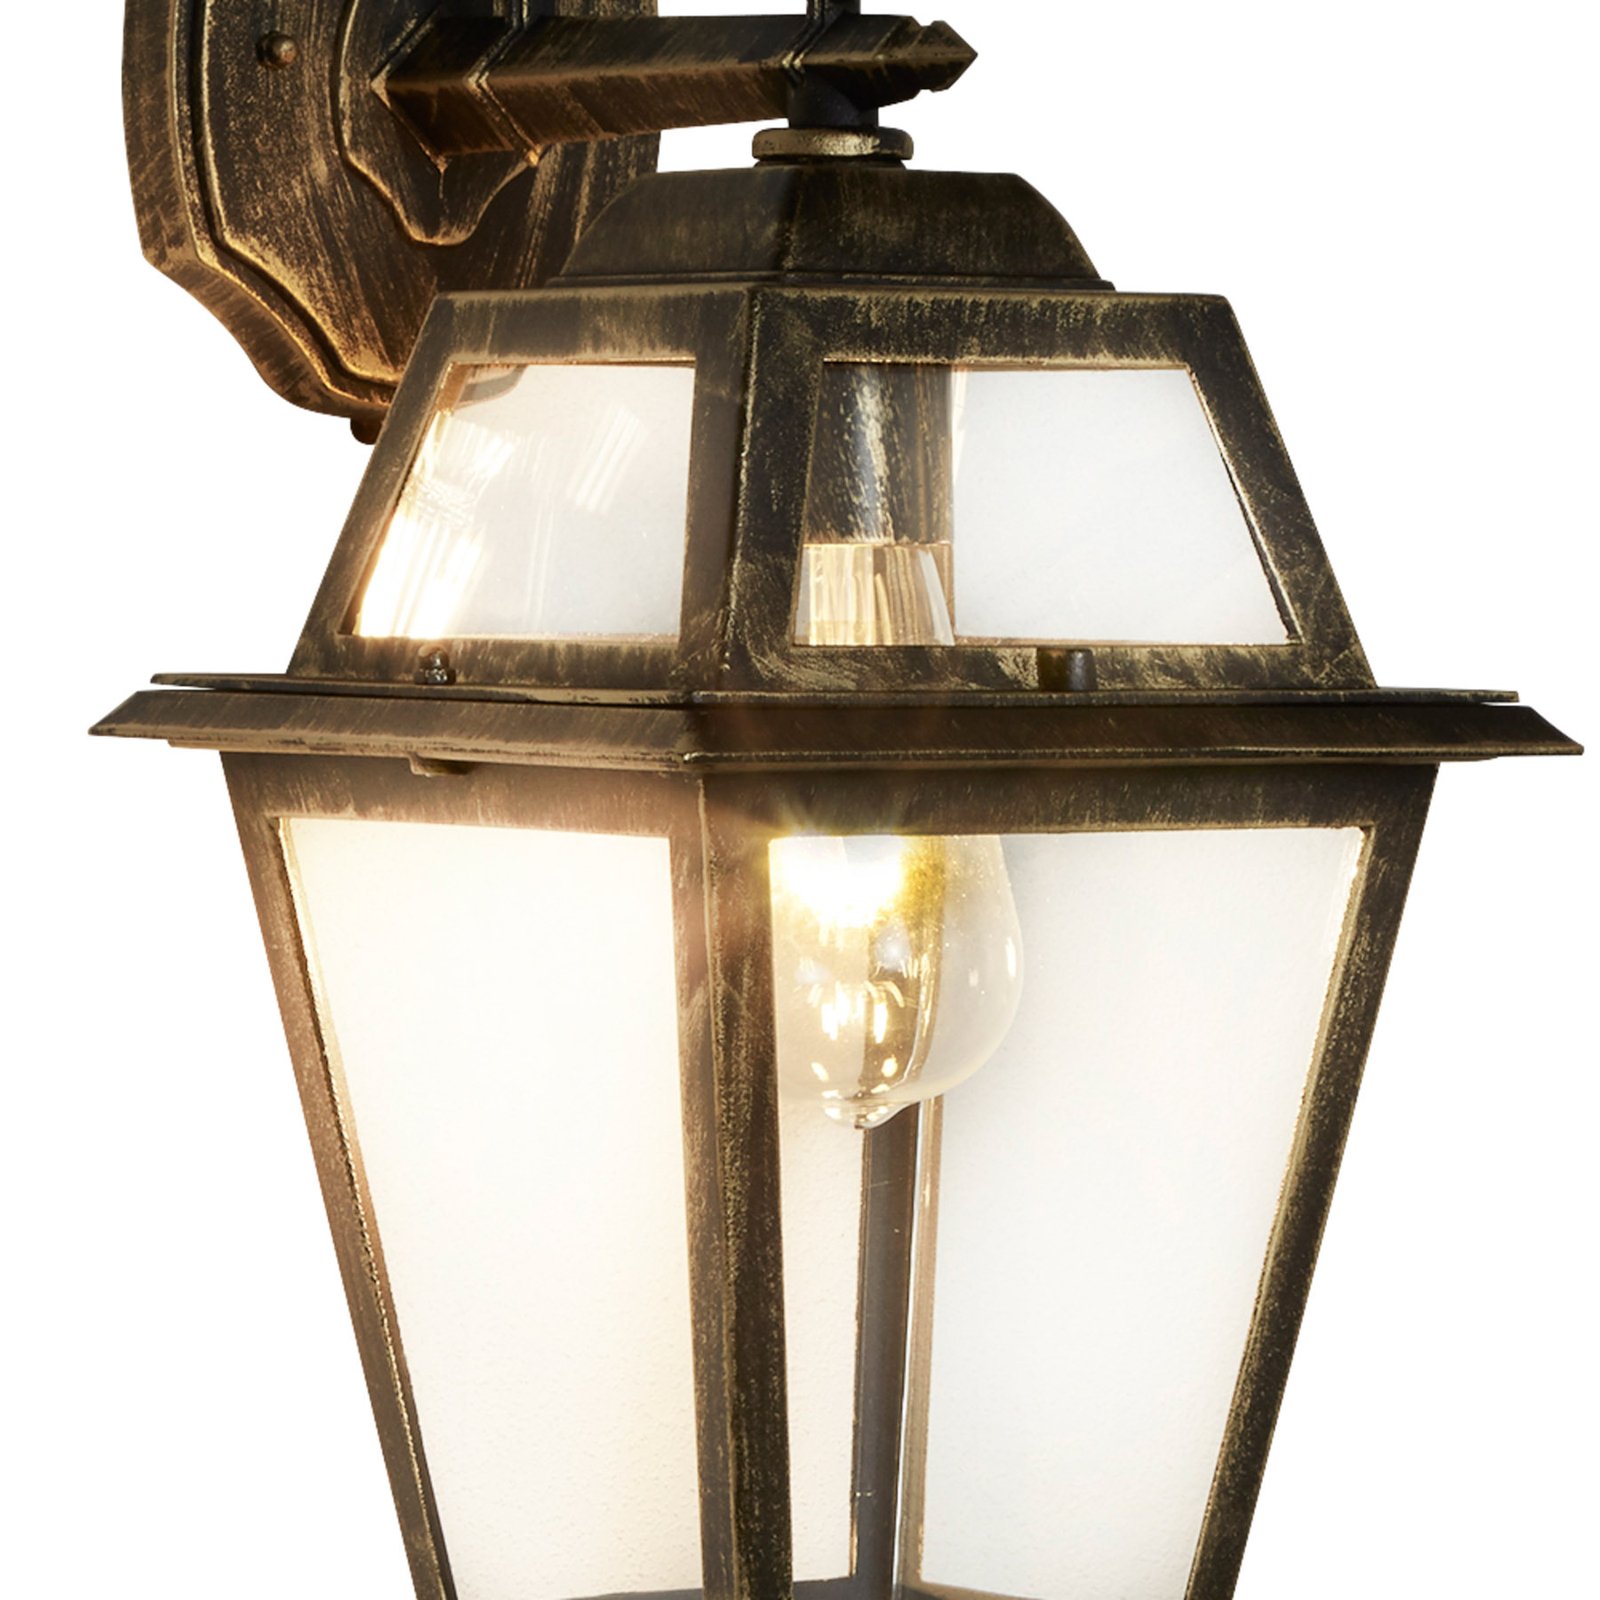 New Orleans outdoor wall light, lantern downwards